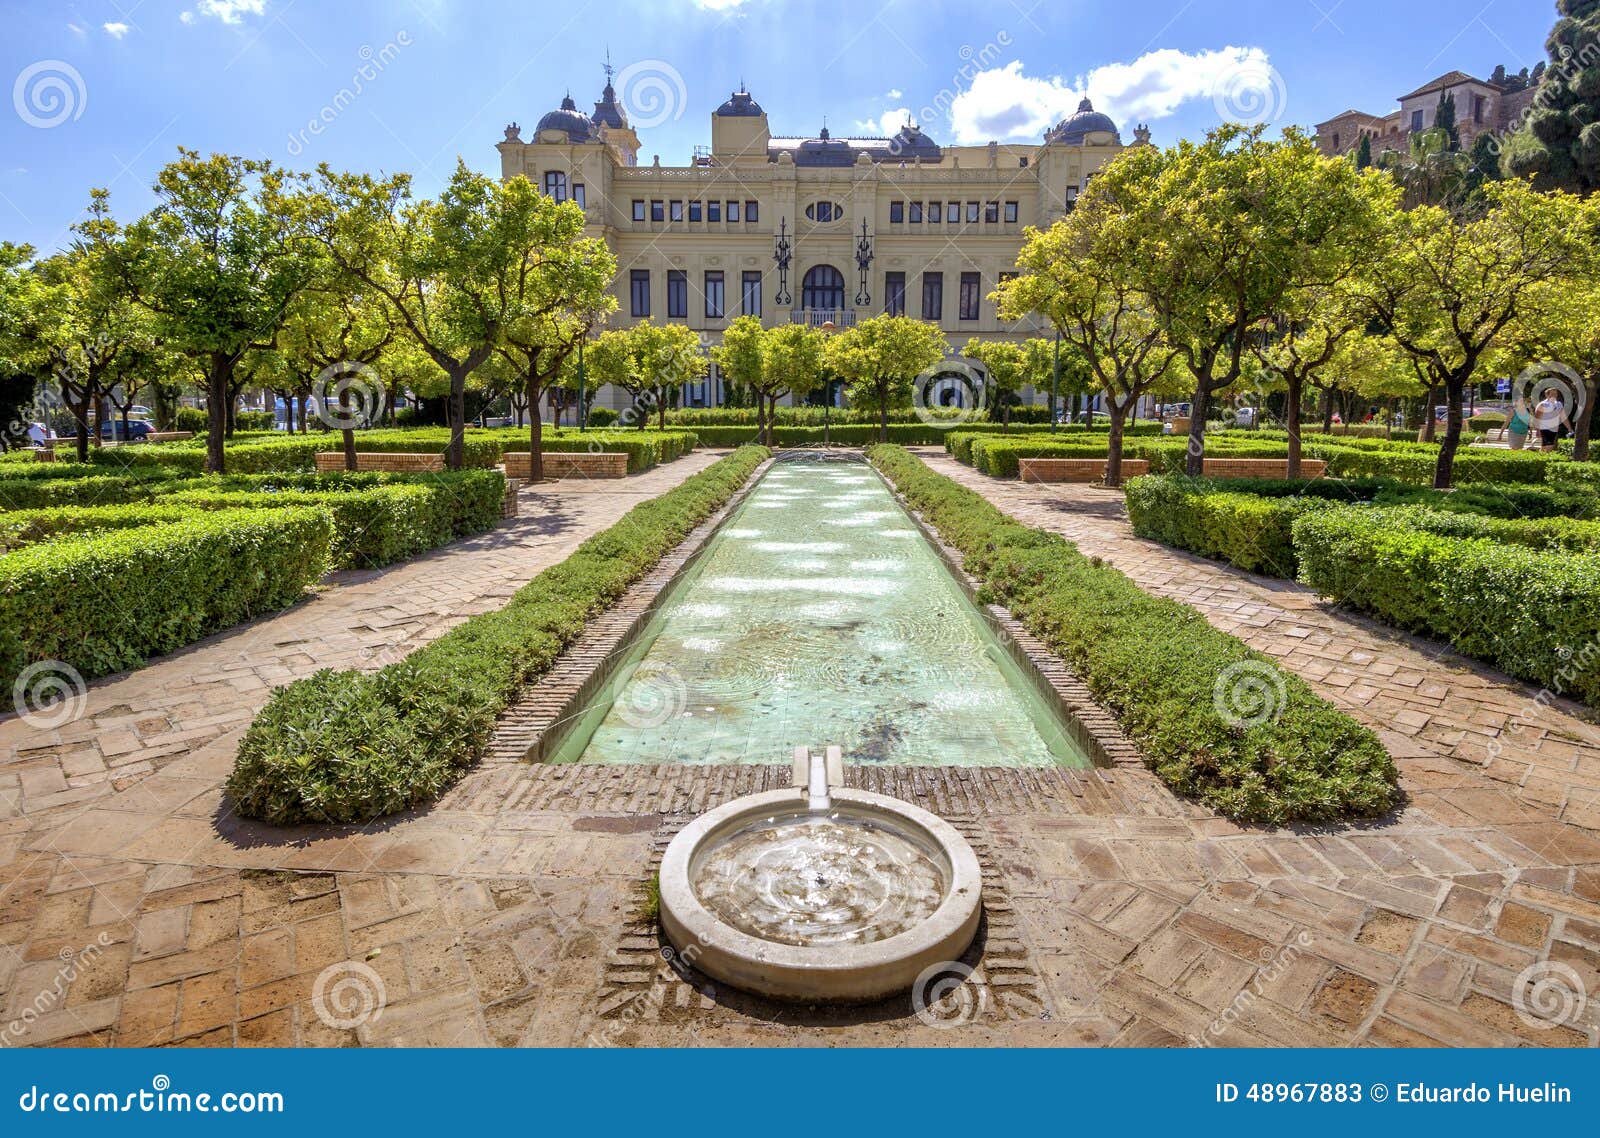 pedro luis alonso gardens and the town hall building in malaga,